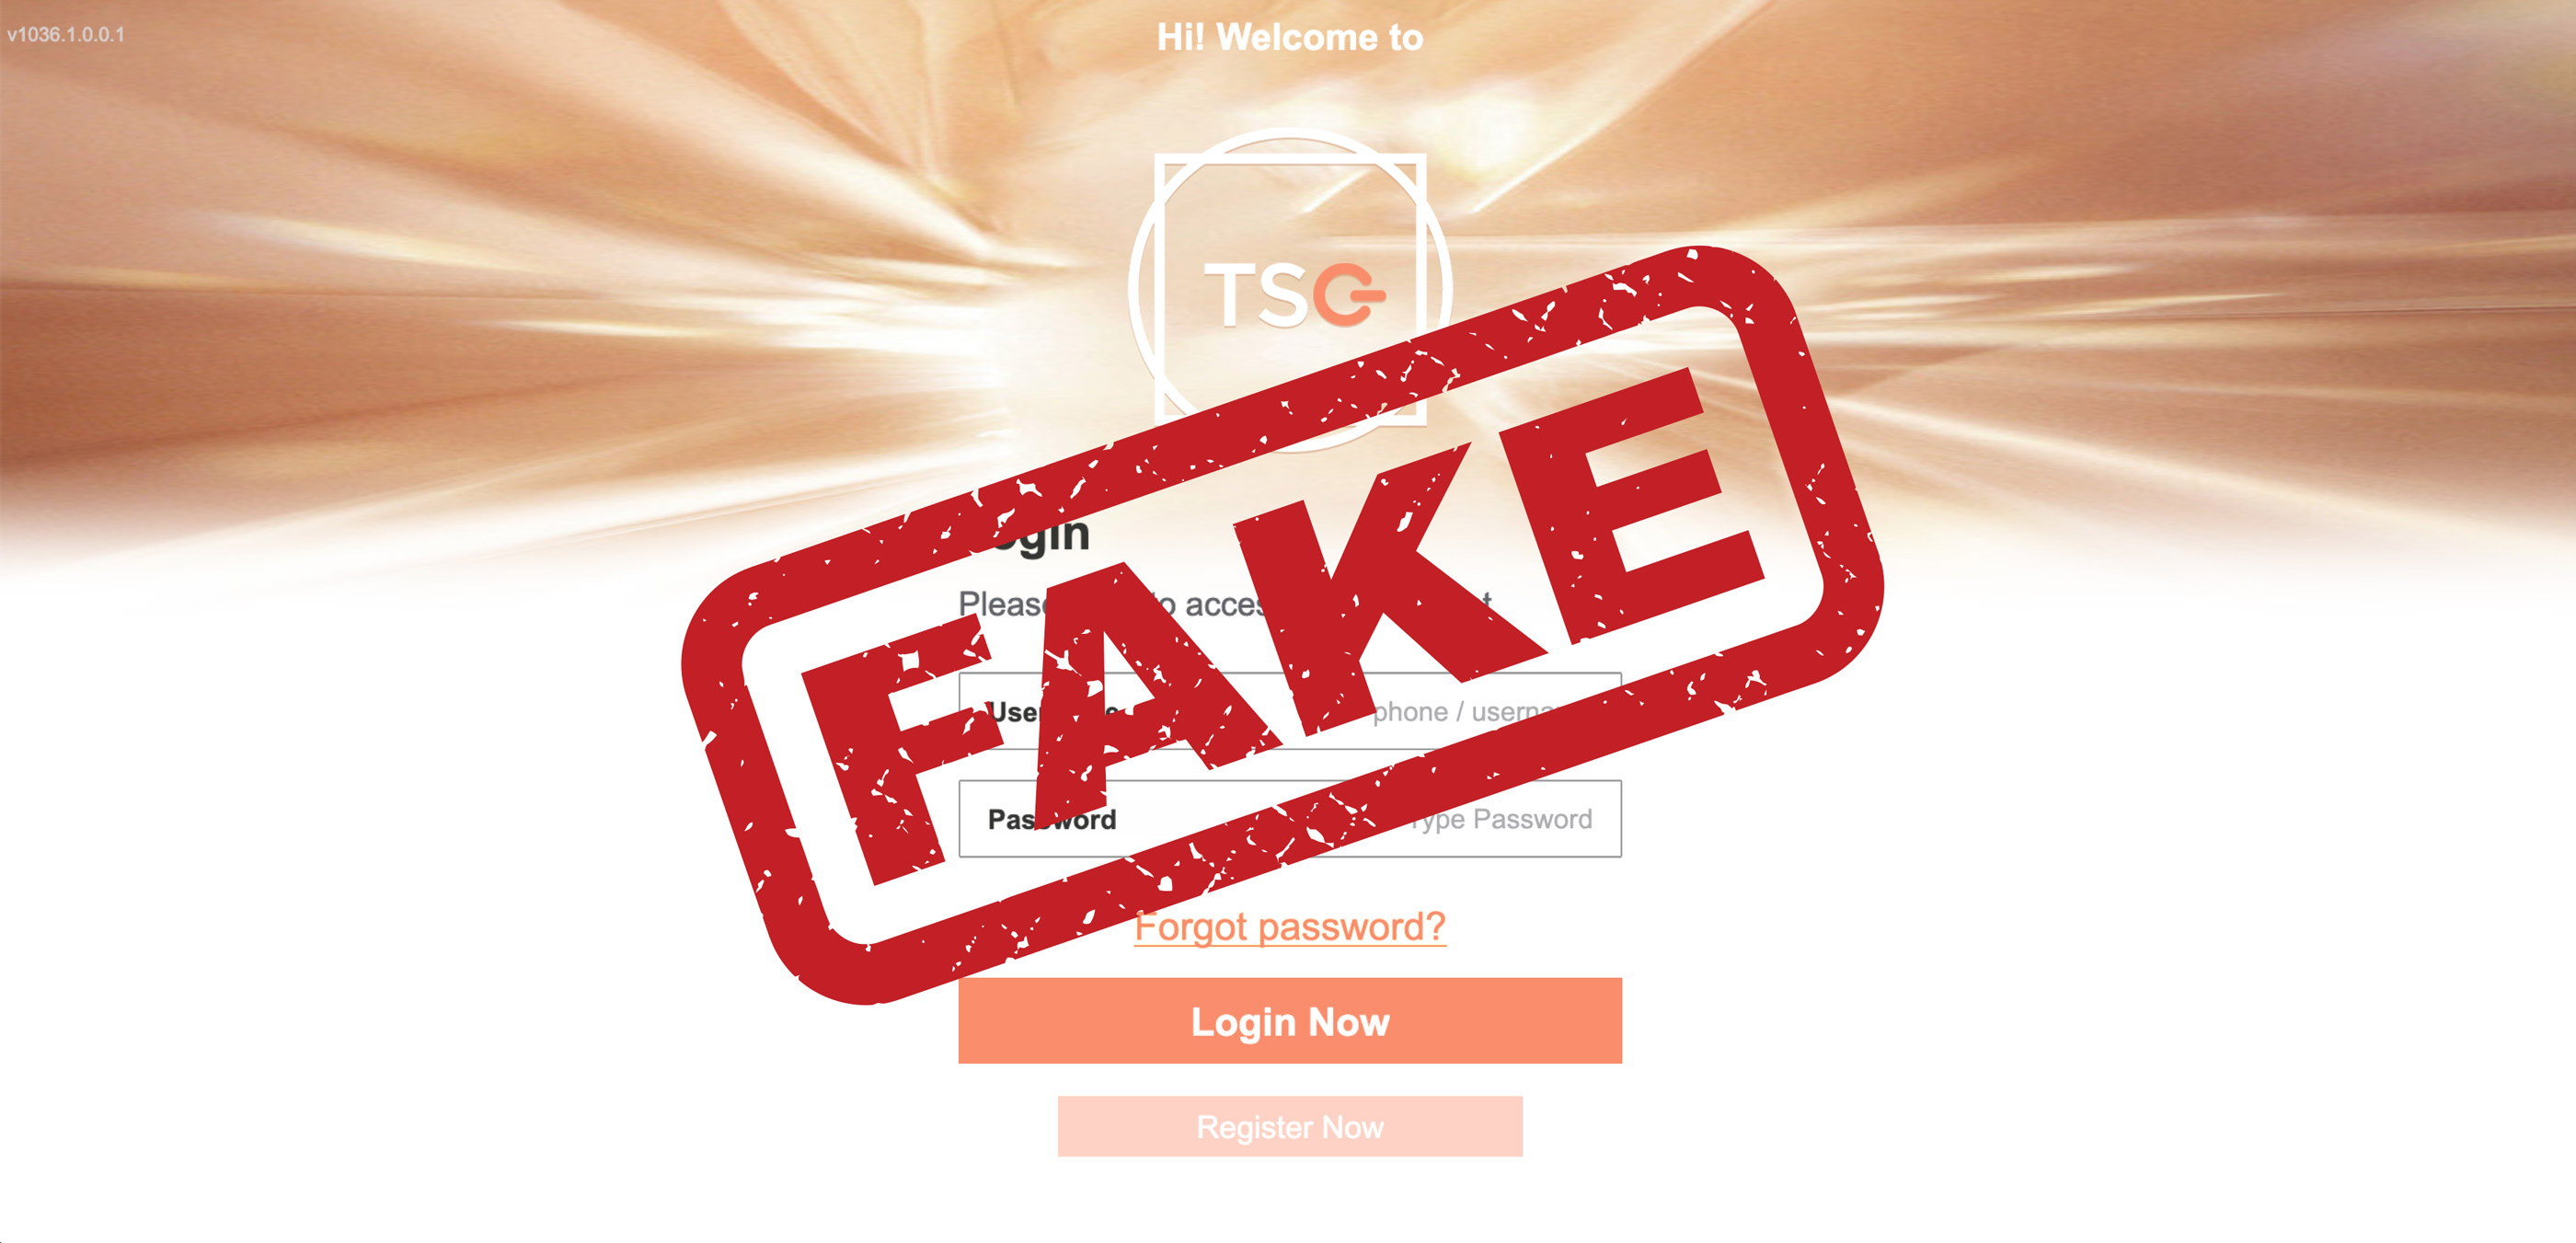 Screenshot of scammers website interface with the word "FAKE" stamped over it in big red letters